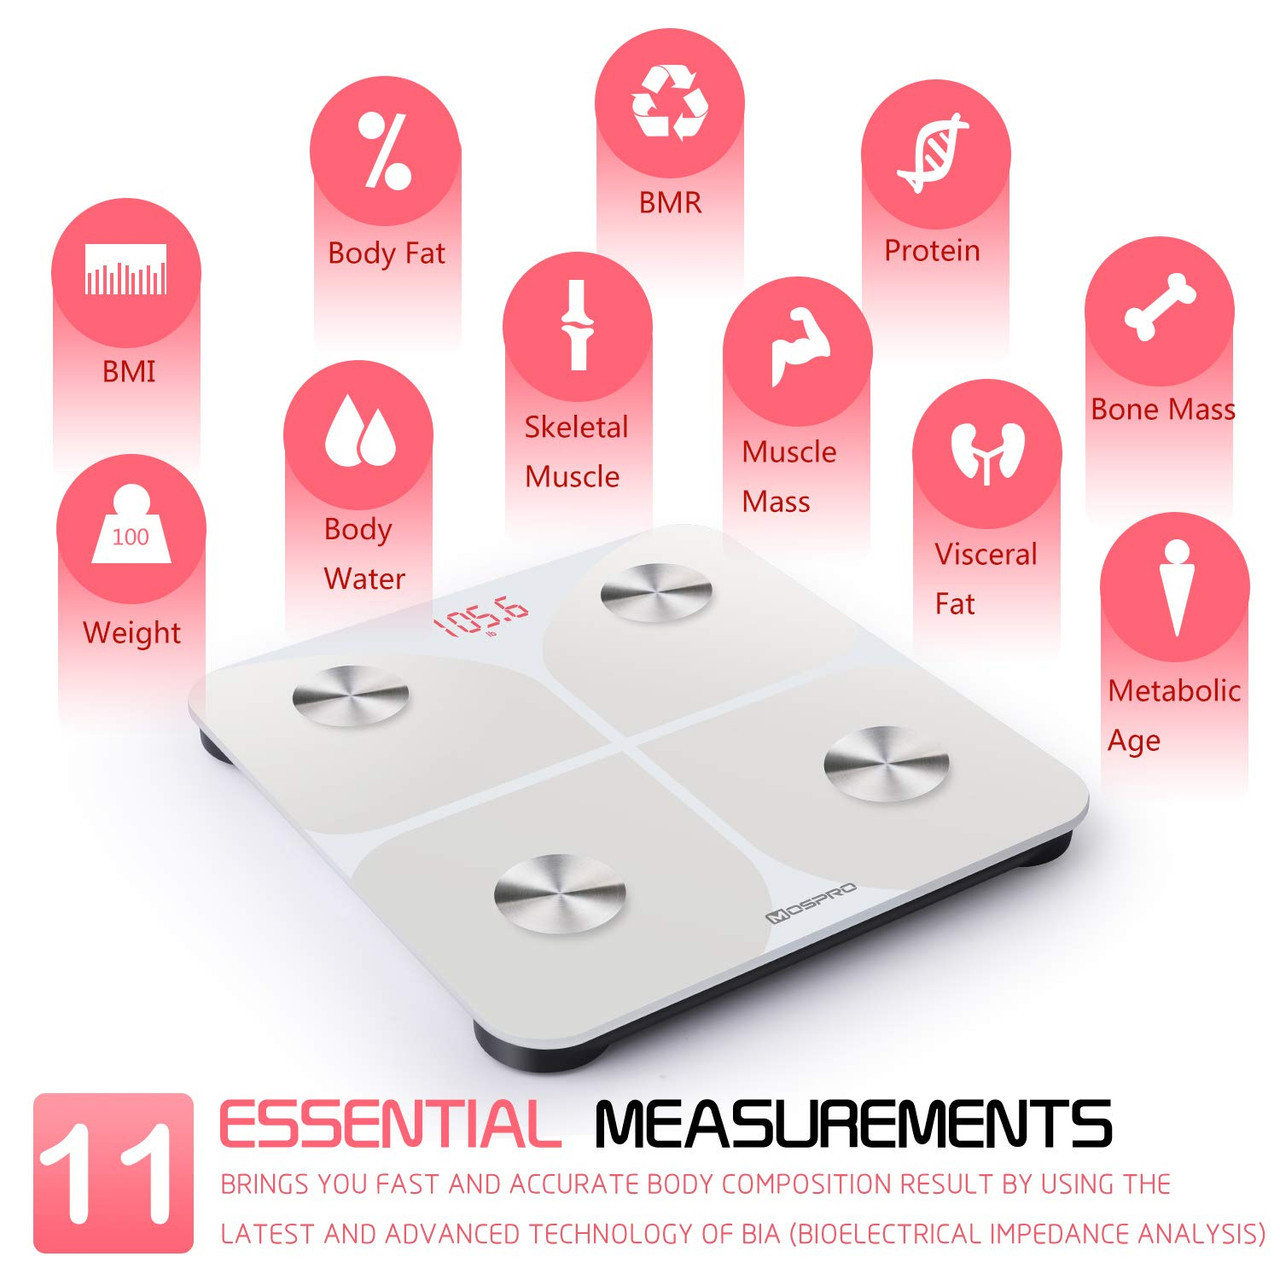 Digital Body Weight Bathroom Scale, MOSPRO Smart Body Composition